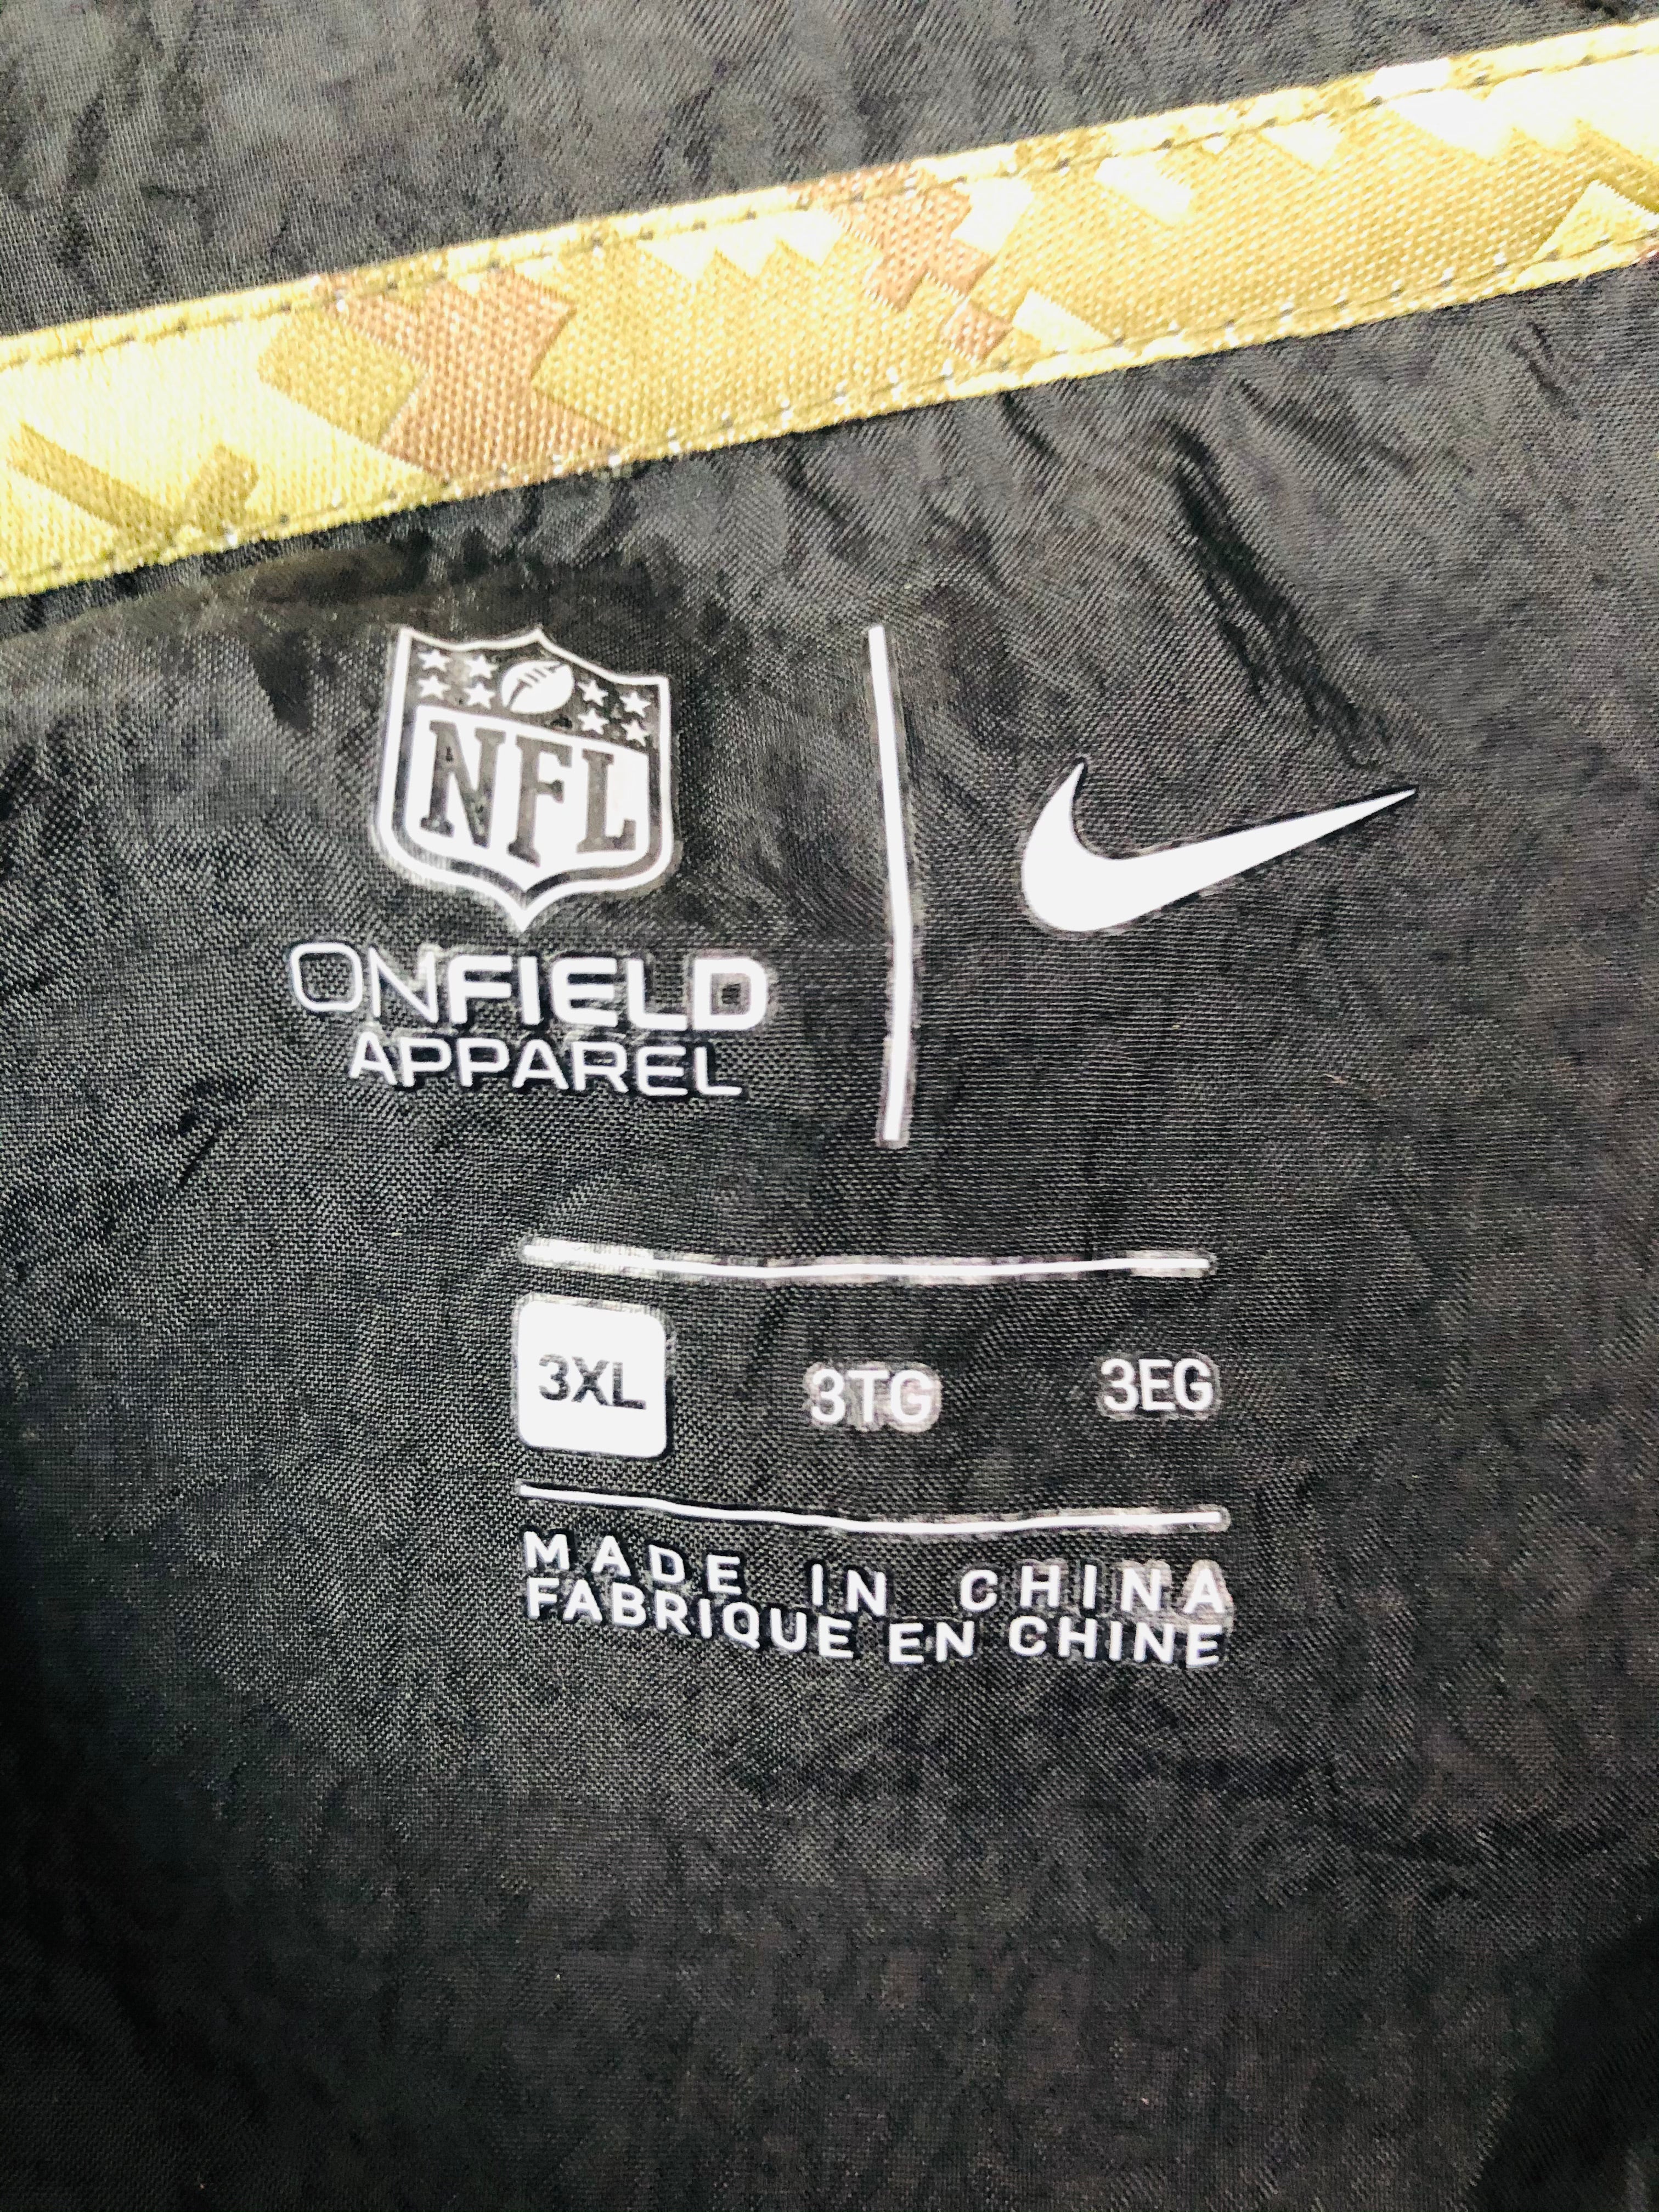 nfl team issued gear